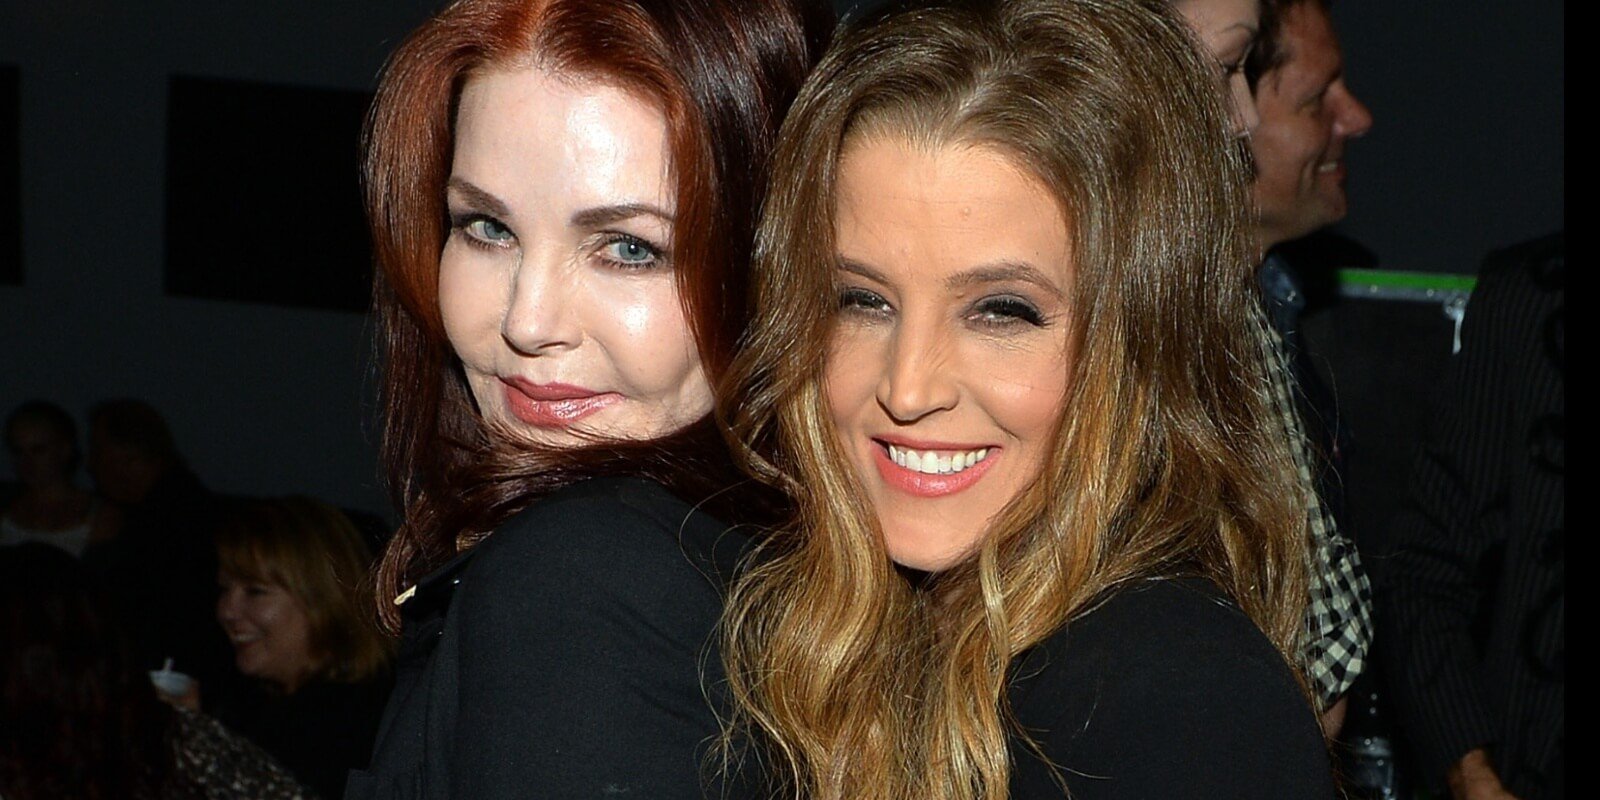 Priscilla Presley and Lisa Marie Presley pictured in 2013.